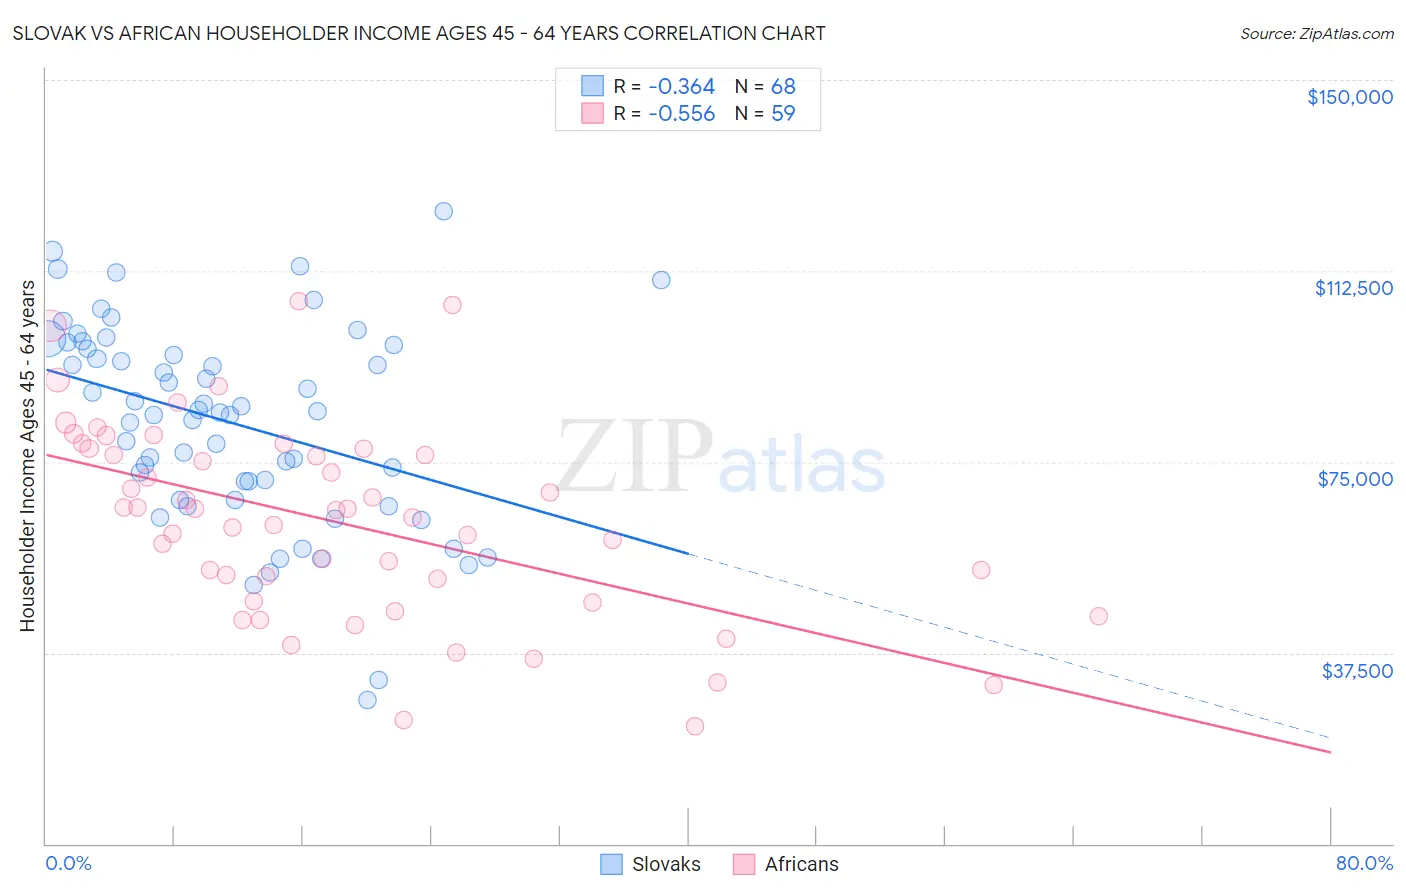 Slovak vs African Householder Income Ages 45 - 64 years